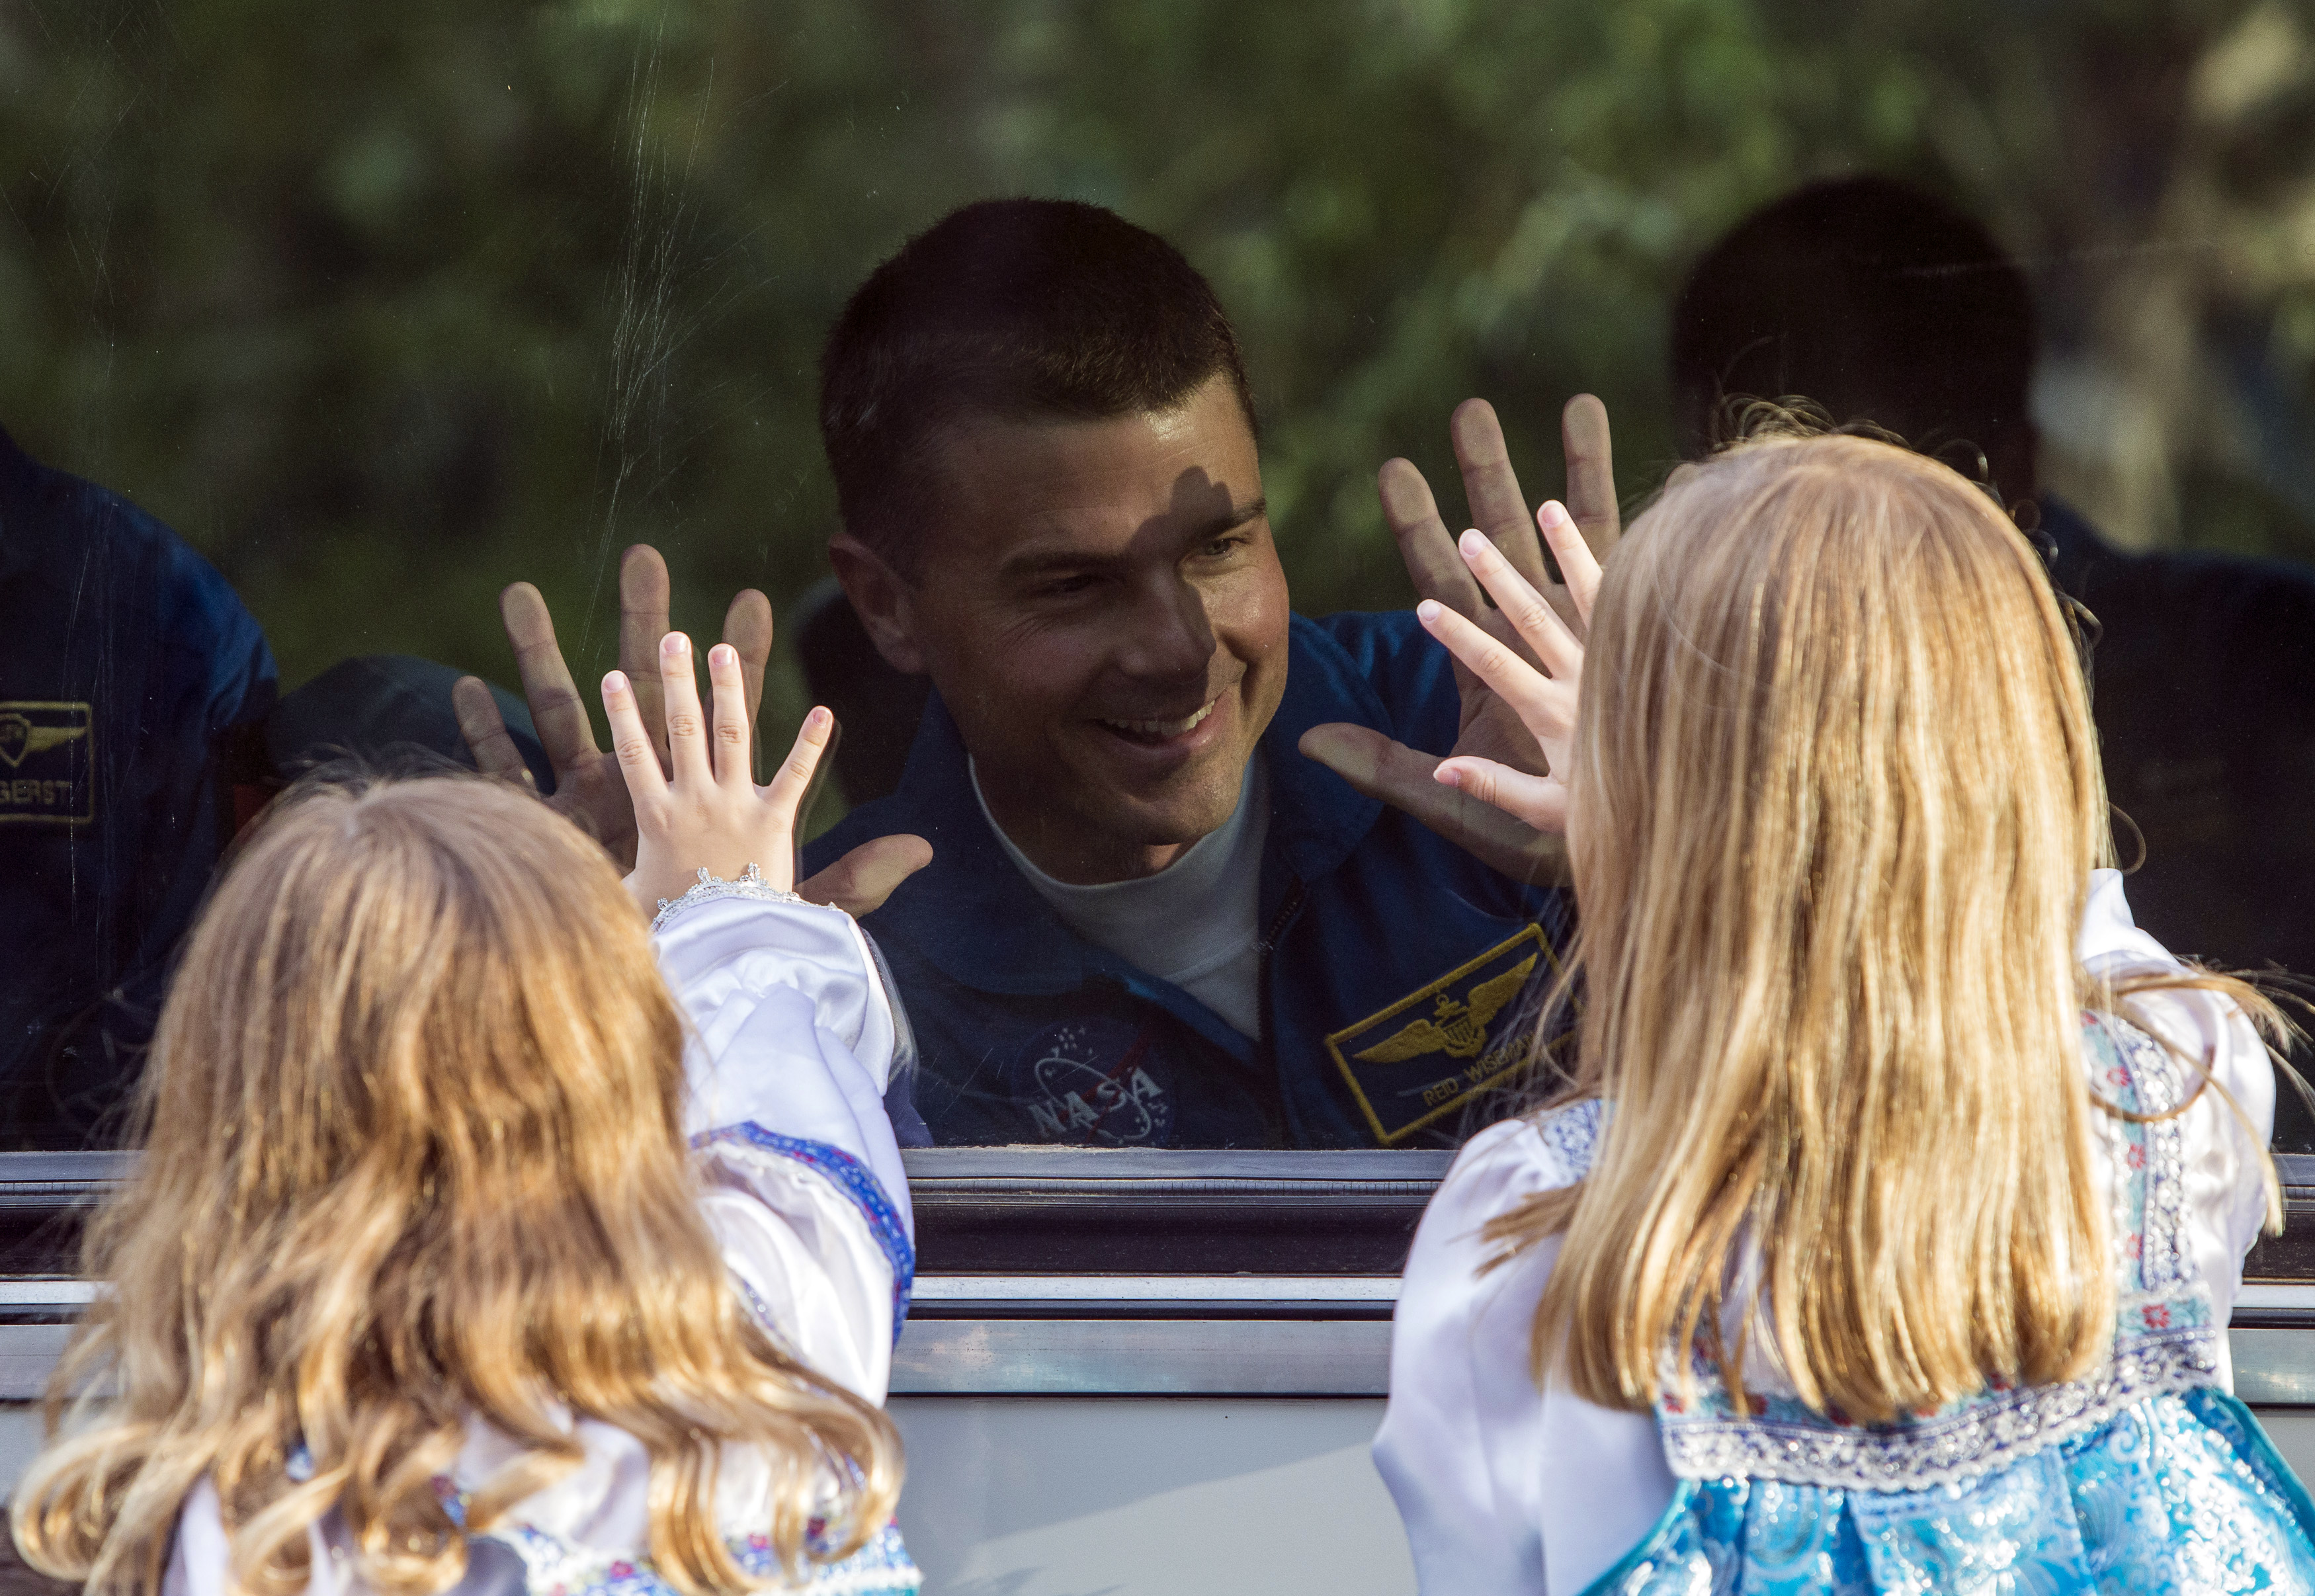 Reid Wiseman a member of the International Space Station crew, waves to his daughters from a bus before departure for a final pre-launch preparation at the Baikonur cosmodrome in Kazakhstan on May 28, 2014.